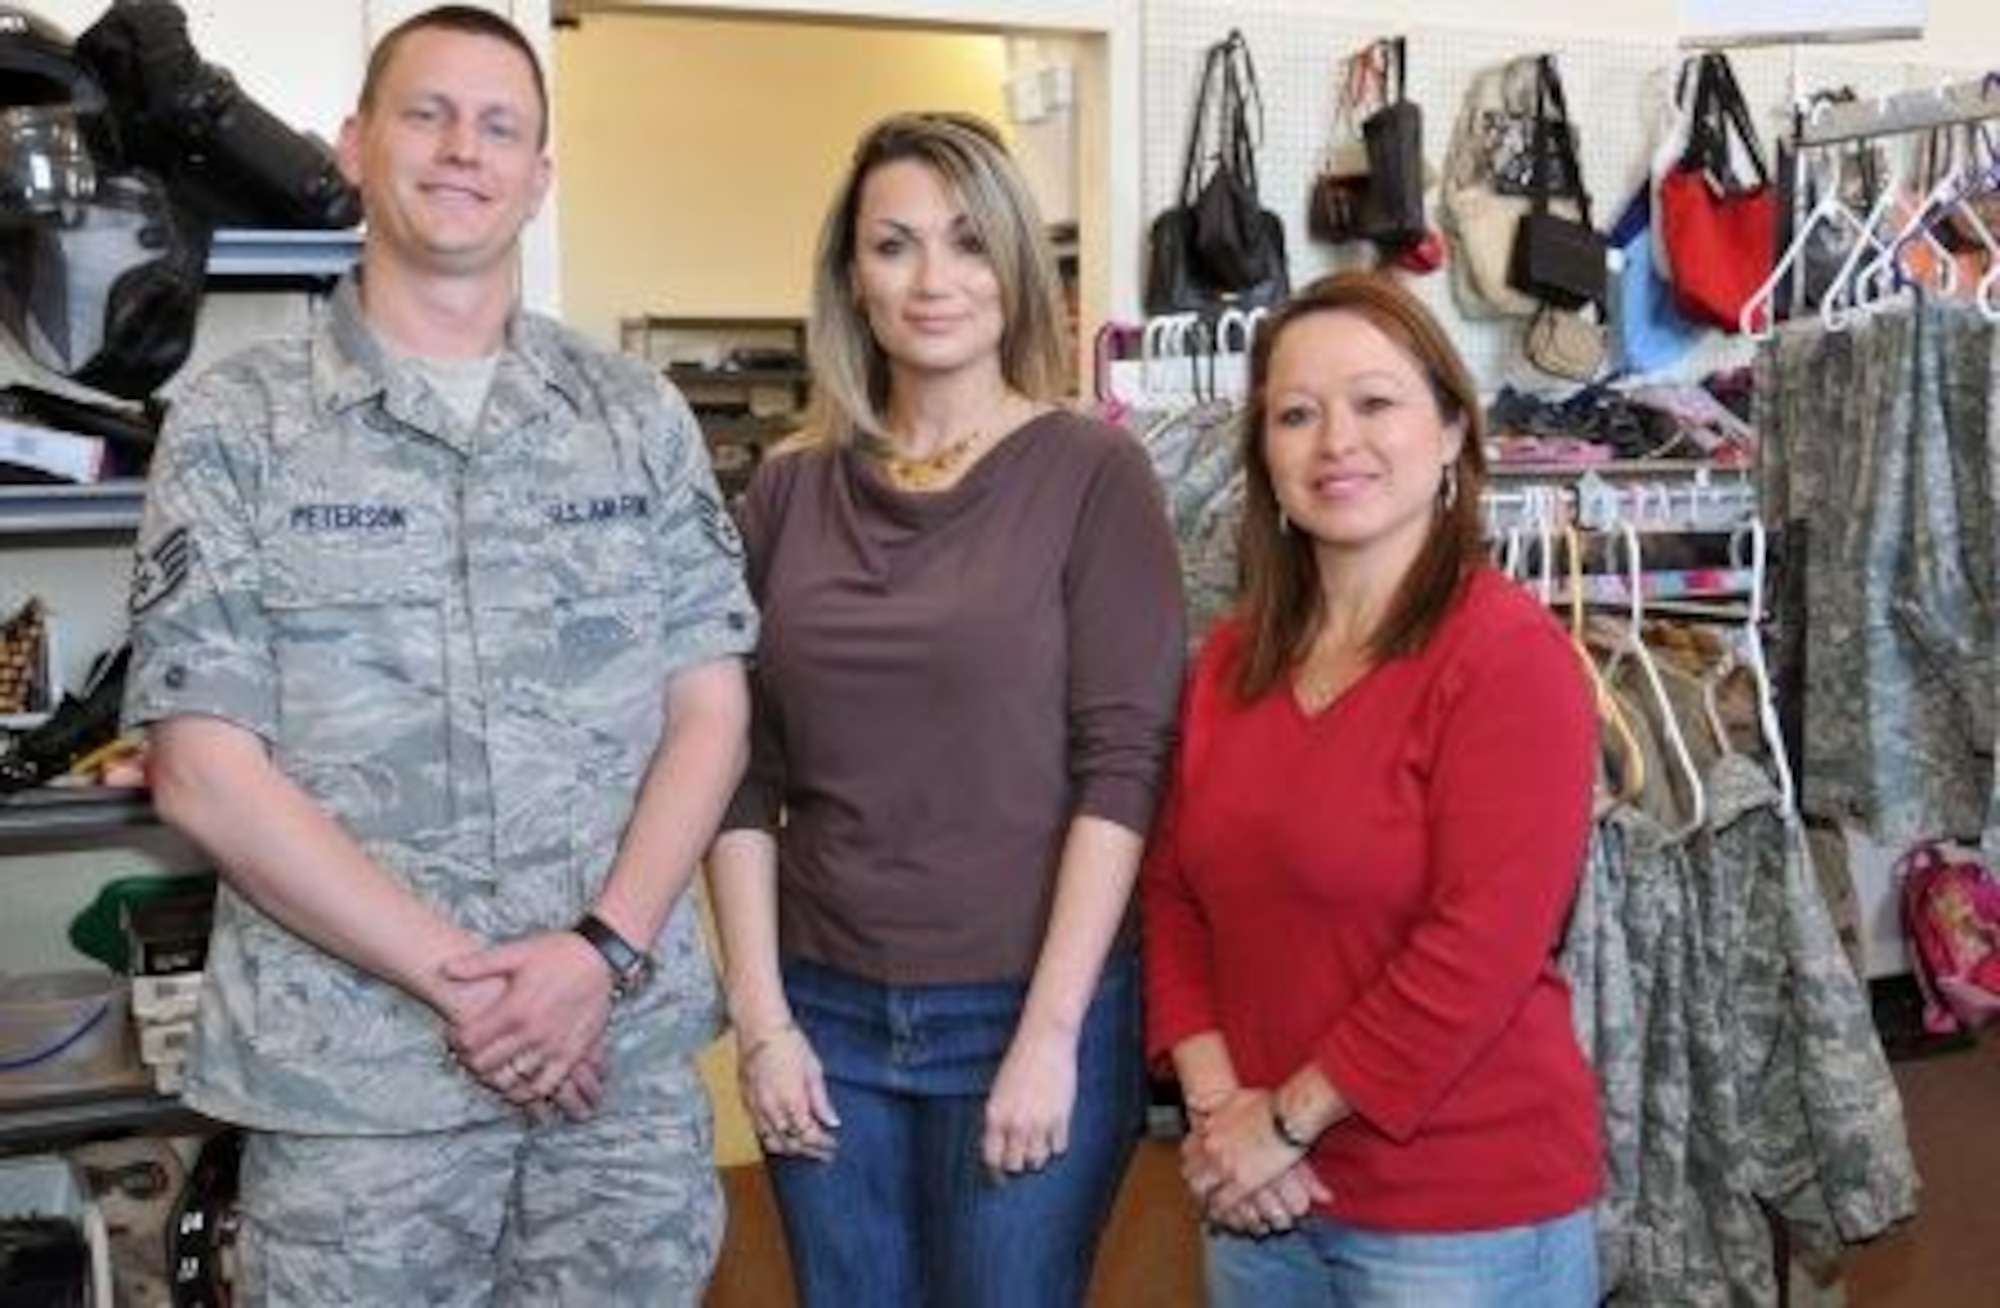 (Left to right) Staff Sgt. Nathan Peterson visits Kirtland Air Force Base Airman’s Attic Director Misty Hauge and Assistant Director Christie Wert. Sergeant Peterson developed the Airman’s Attic Directory website that serves as a focal point for information about host base’s Airman’s Attics.